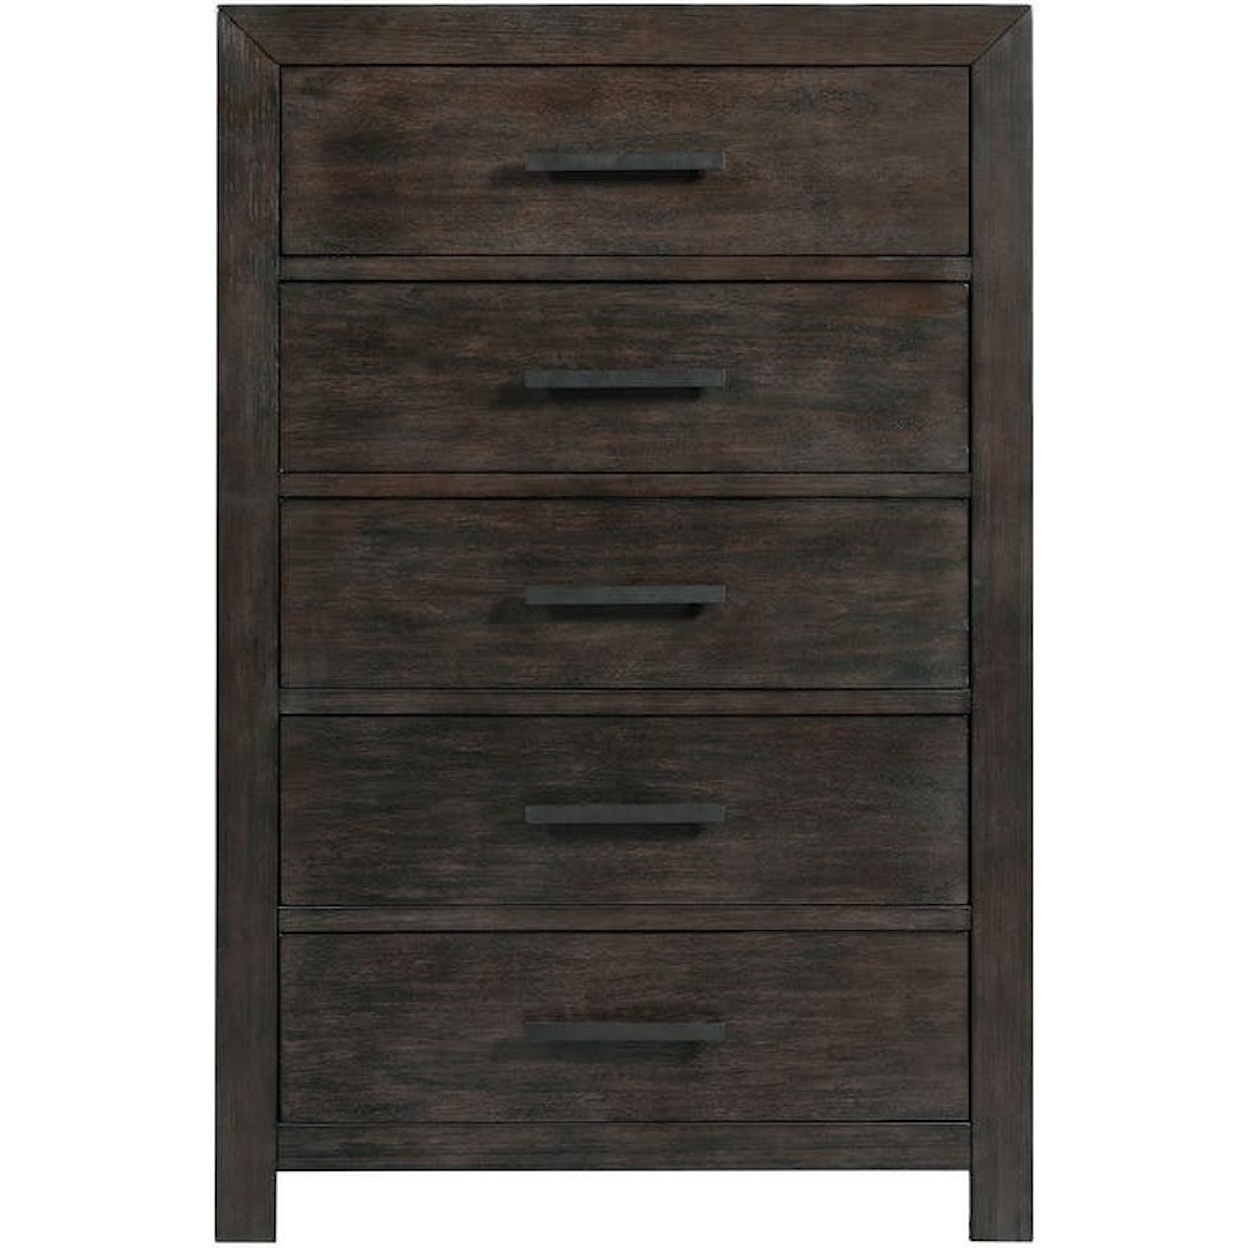 Elements International Shelby SY600 Chest of Drawers